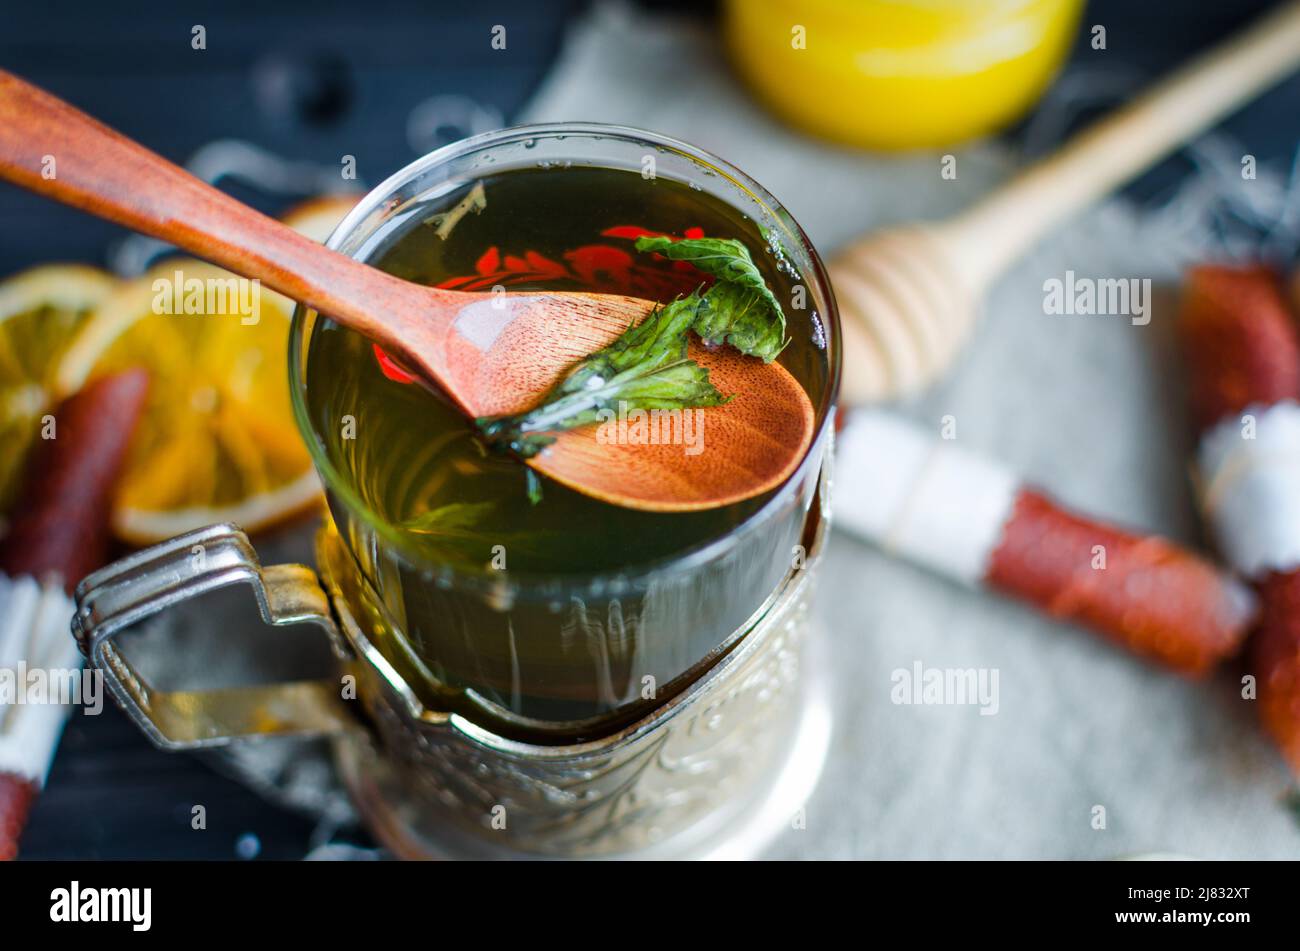 Cup of green tea  with mint,  lemon slice, dry fruits roll and tea mint leaves with strawberry in a wooden spoon on wooden background, copy space Stock Photo